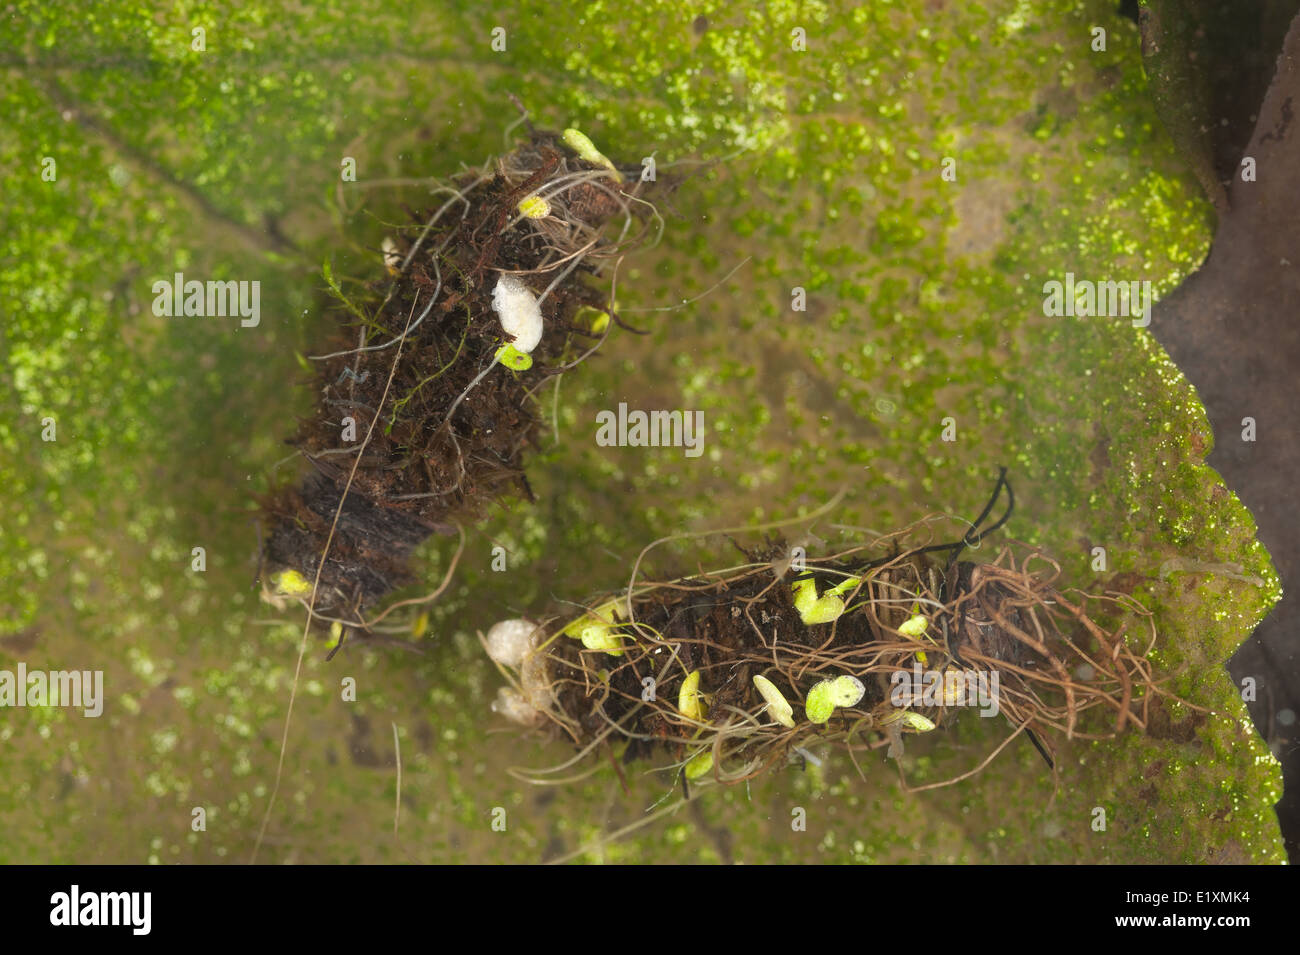 Cases of insect caddis fly made from cut leaves and organic materials so blending in with the background in still water pond Stock Photo